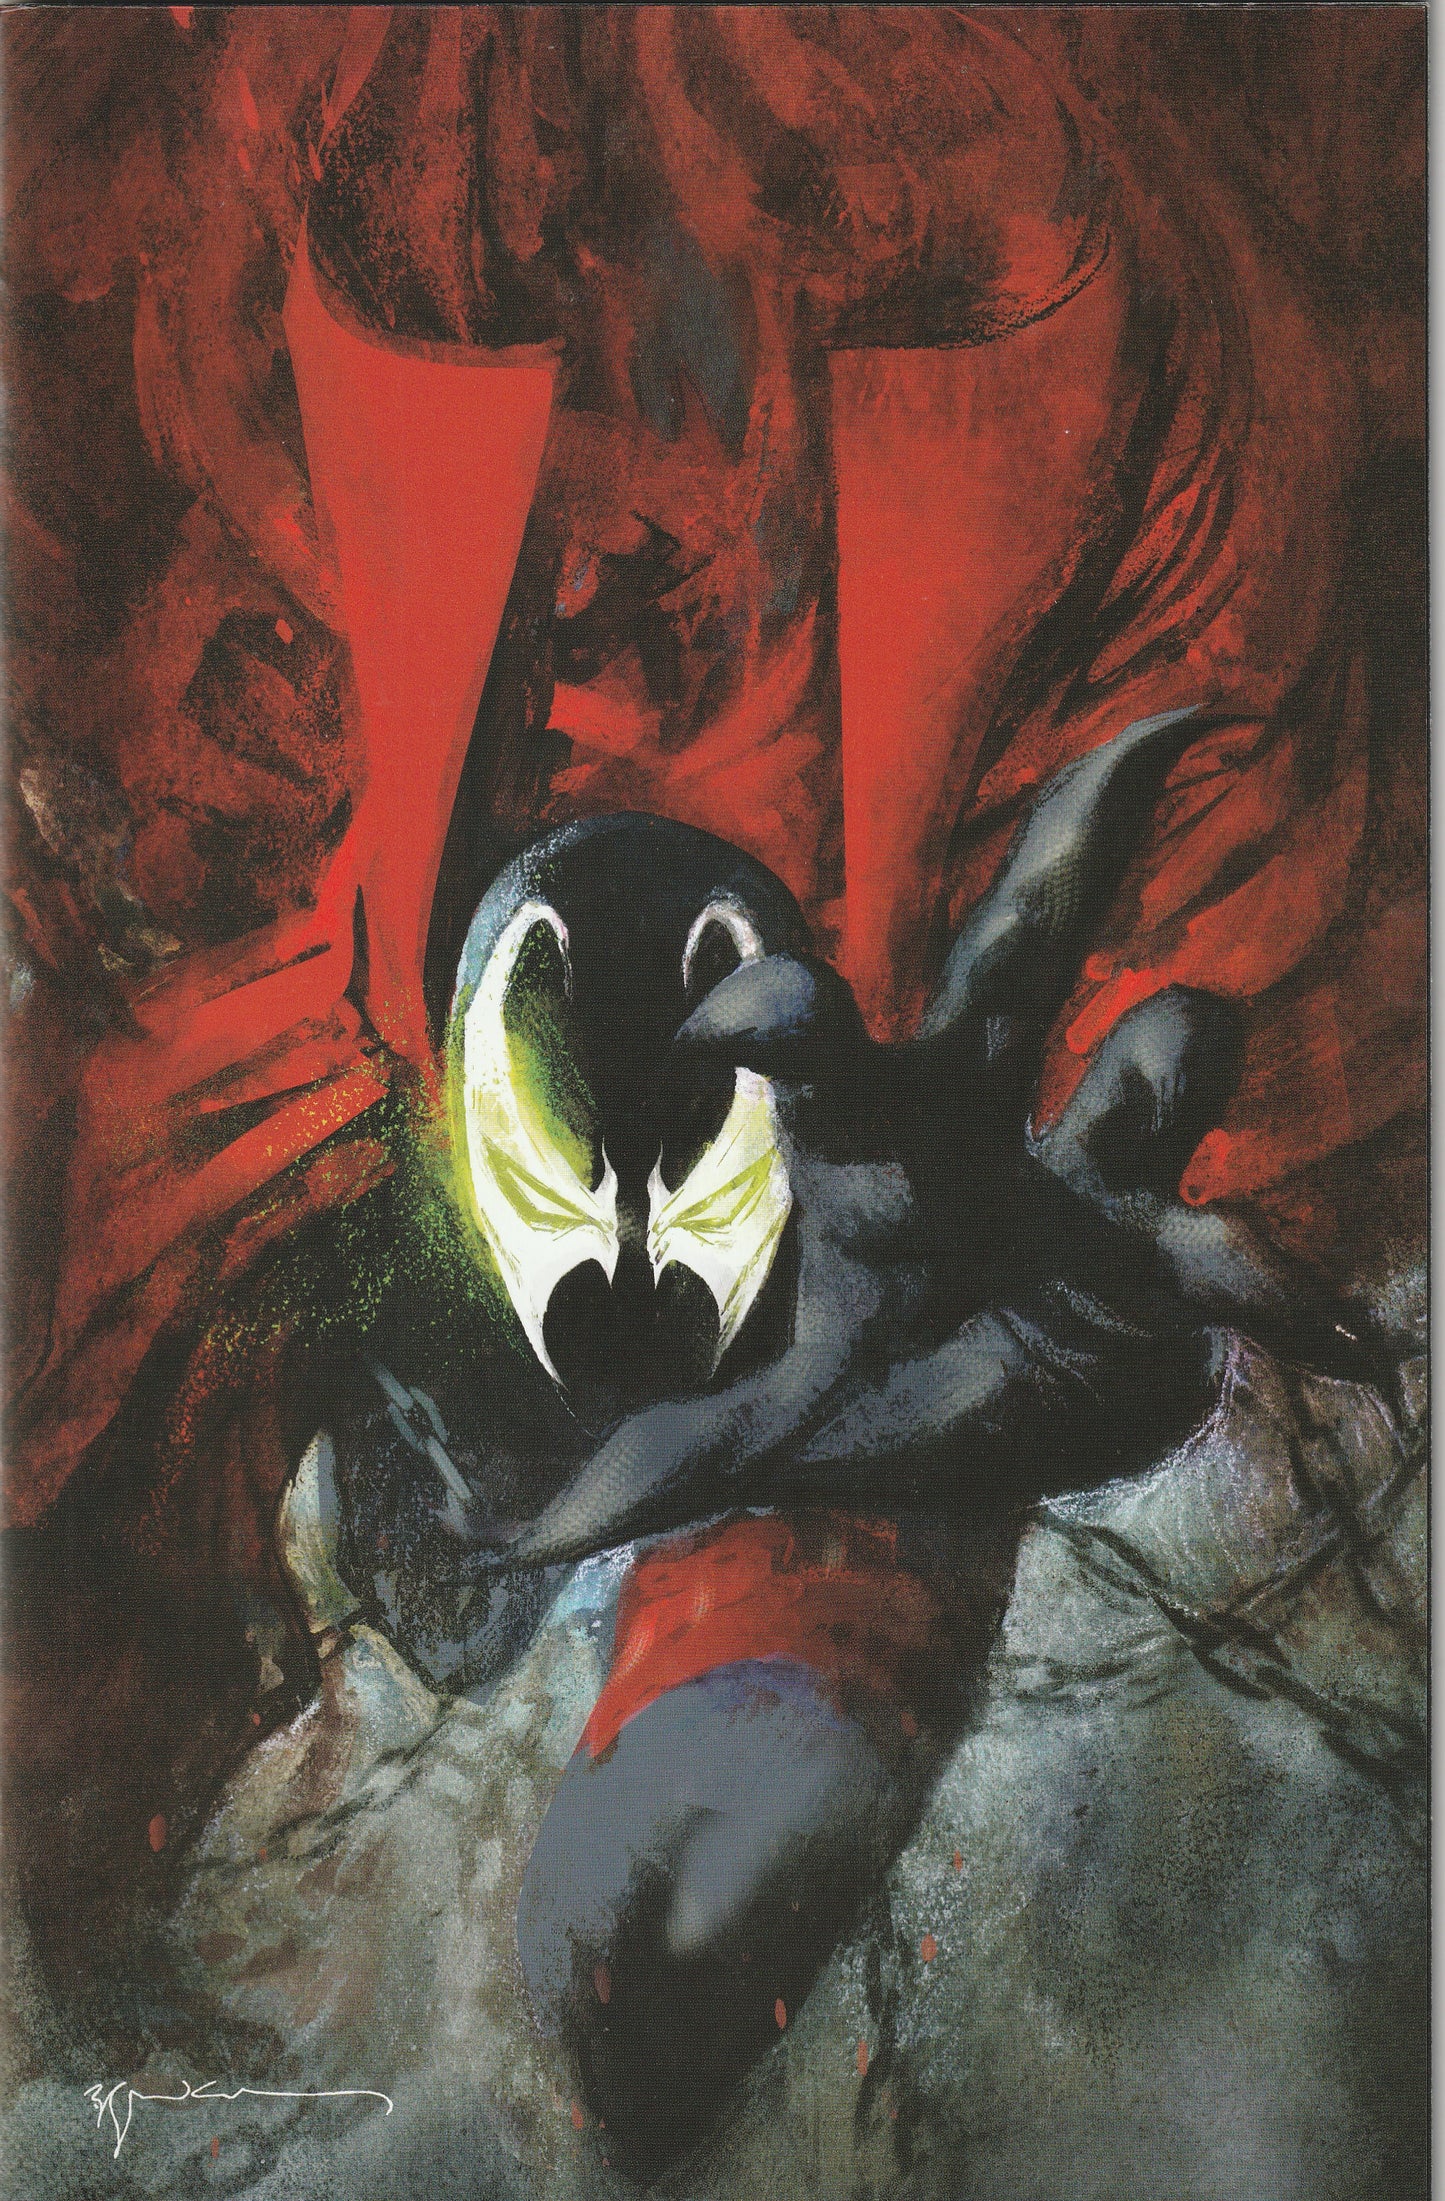 Spawn #301 (2019) - Cover M by Bill Sienkiewicz - Virgin Cover